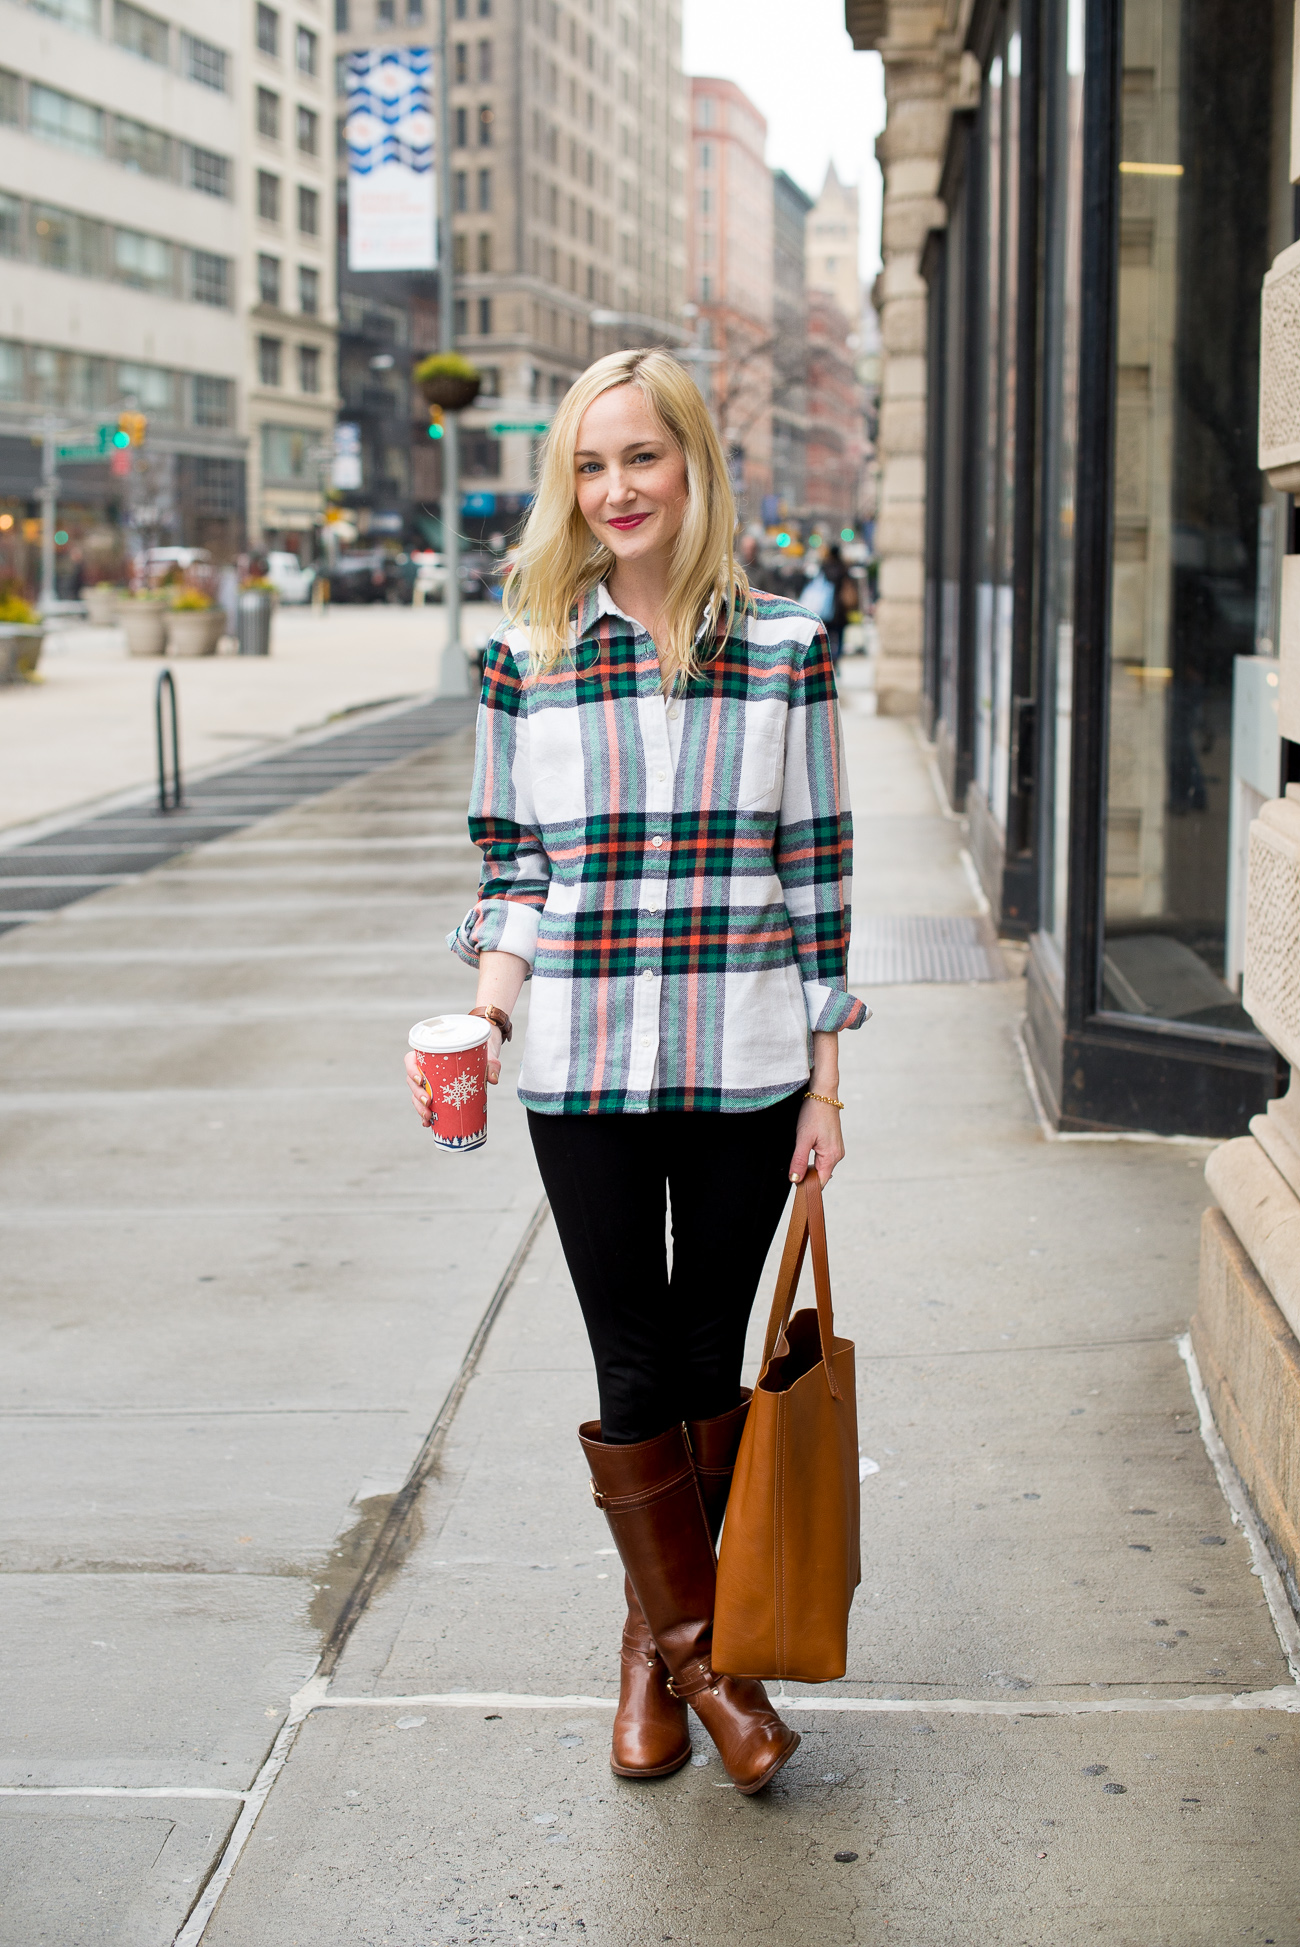 J.Crew Flannel Shirts in Flatiron District, NYC - Kelly in the City